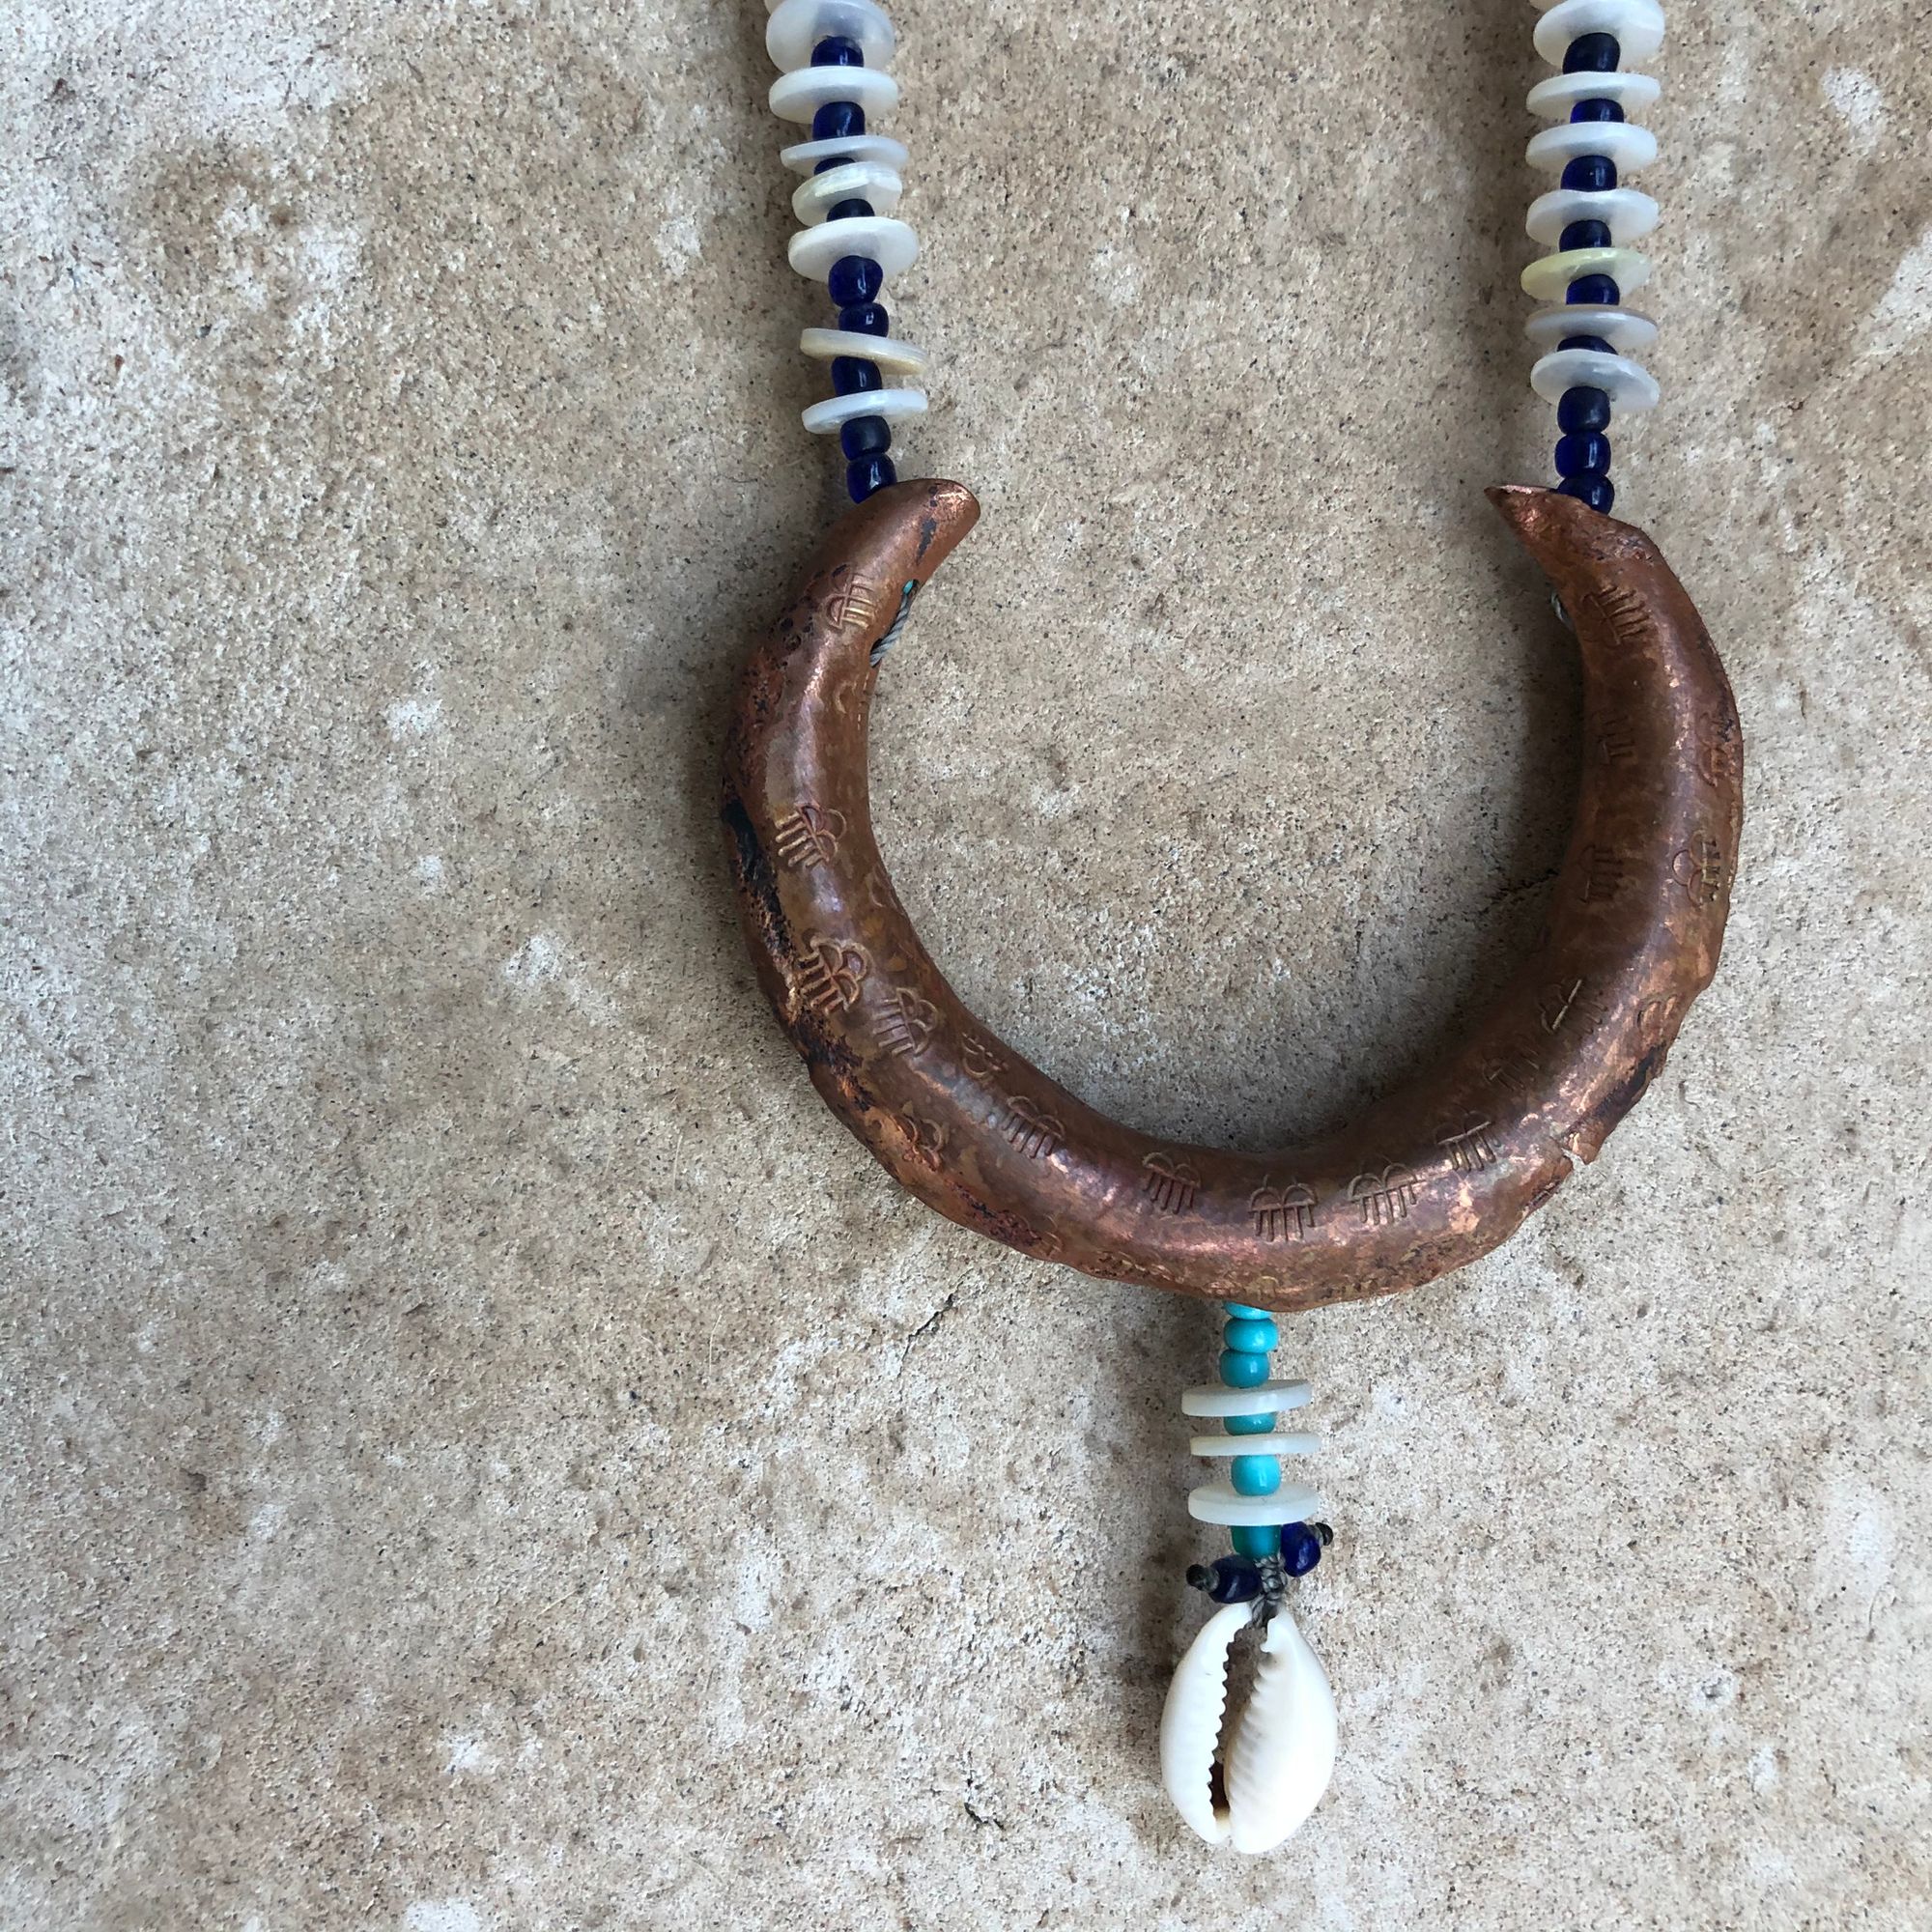 Detail of a copper crescent moon necklace with blue beads